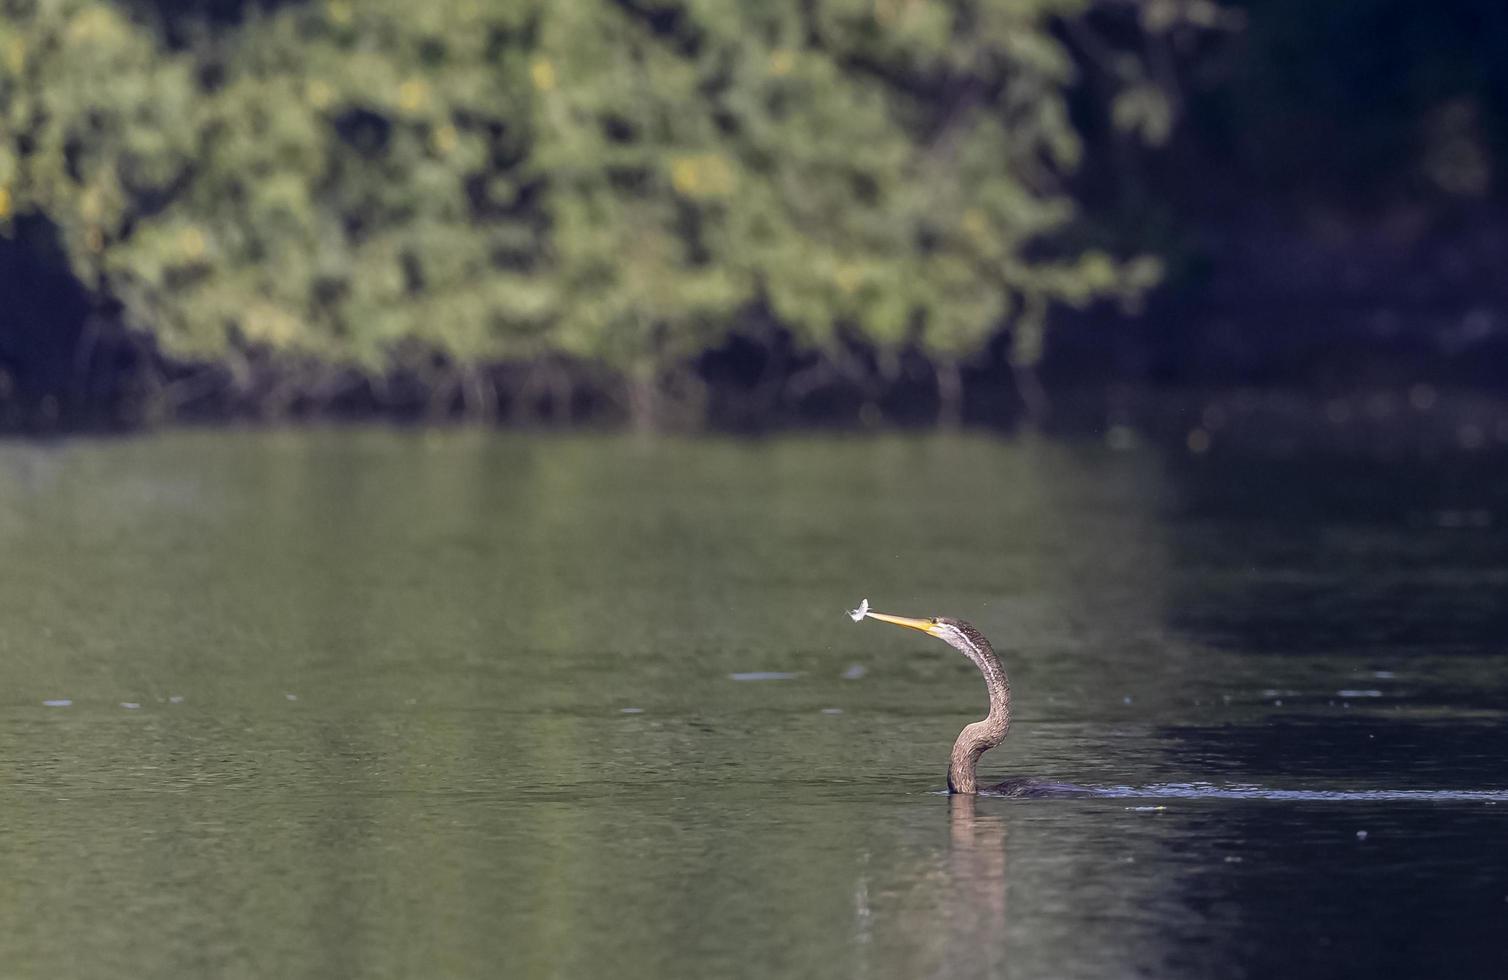 Oriental Darter or Indian snake bird catching fish at the water body. photo